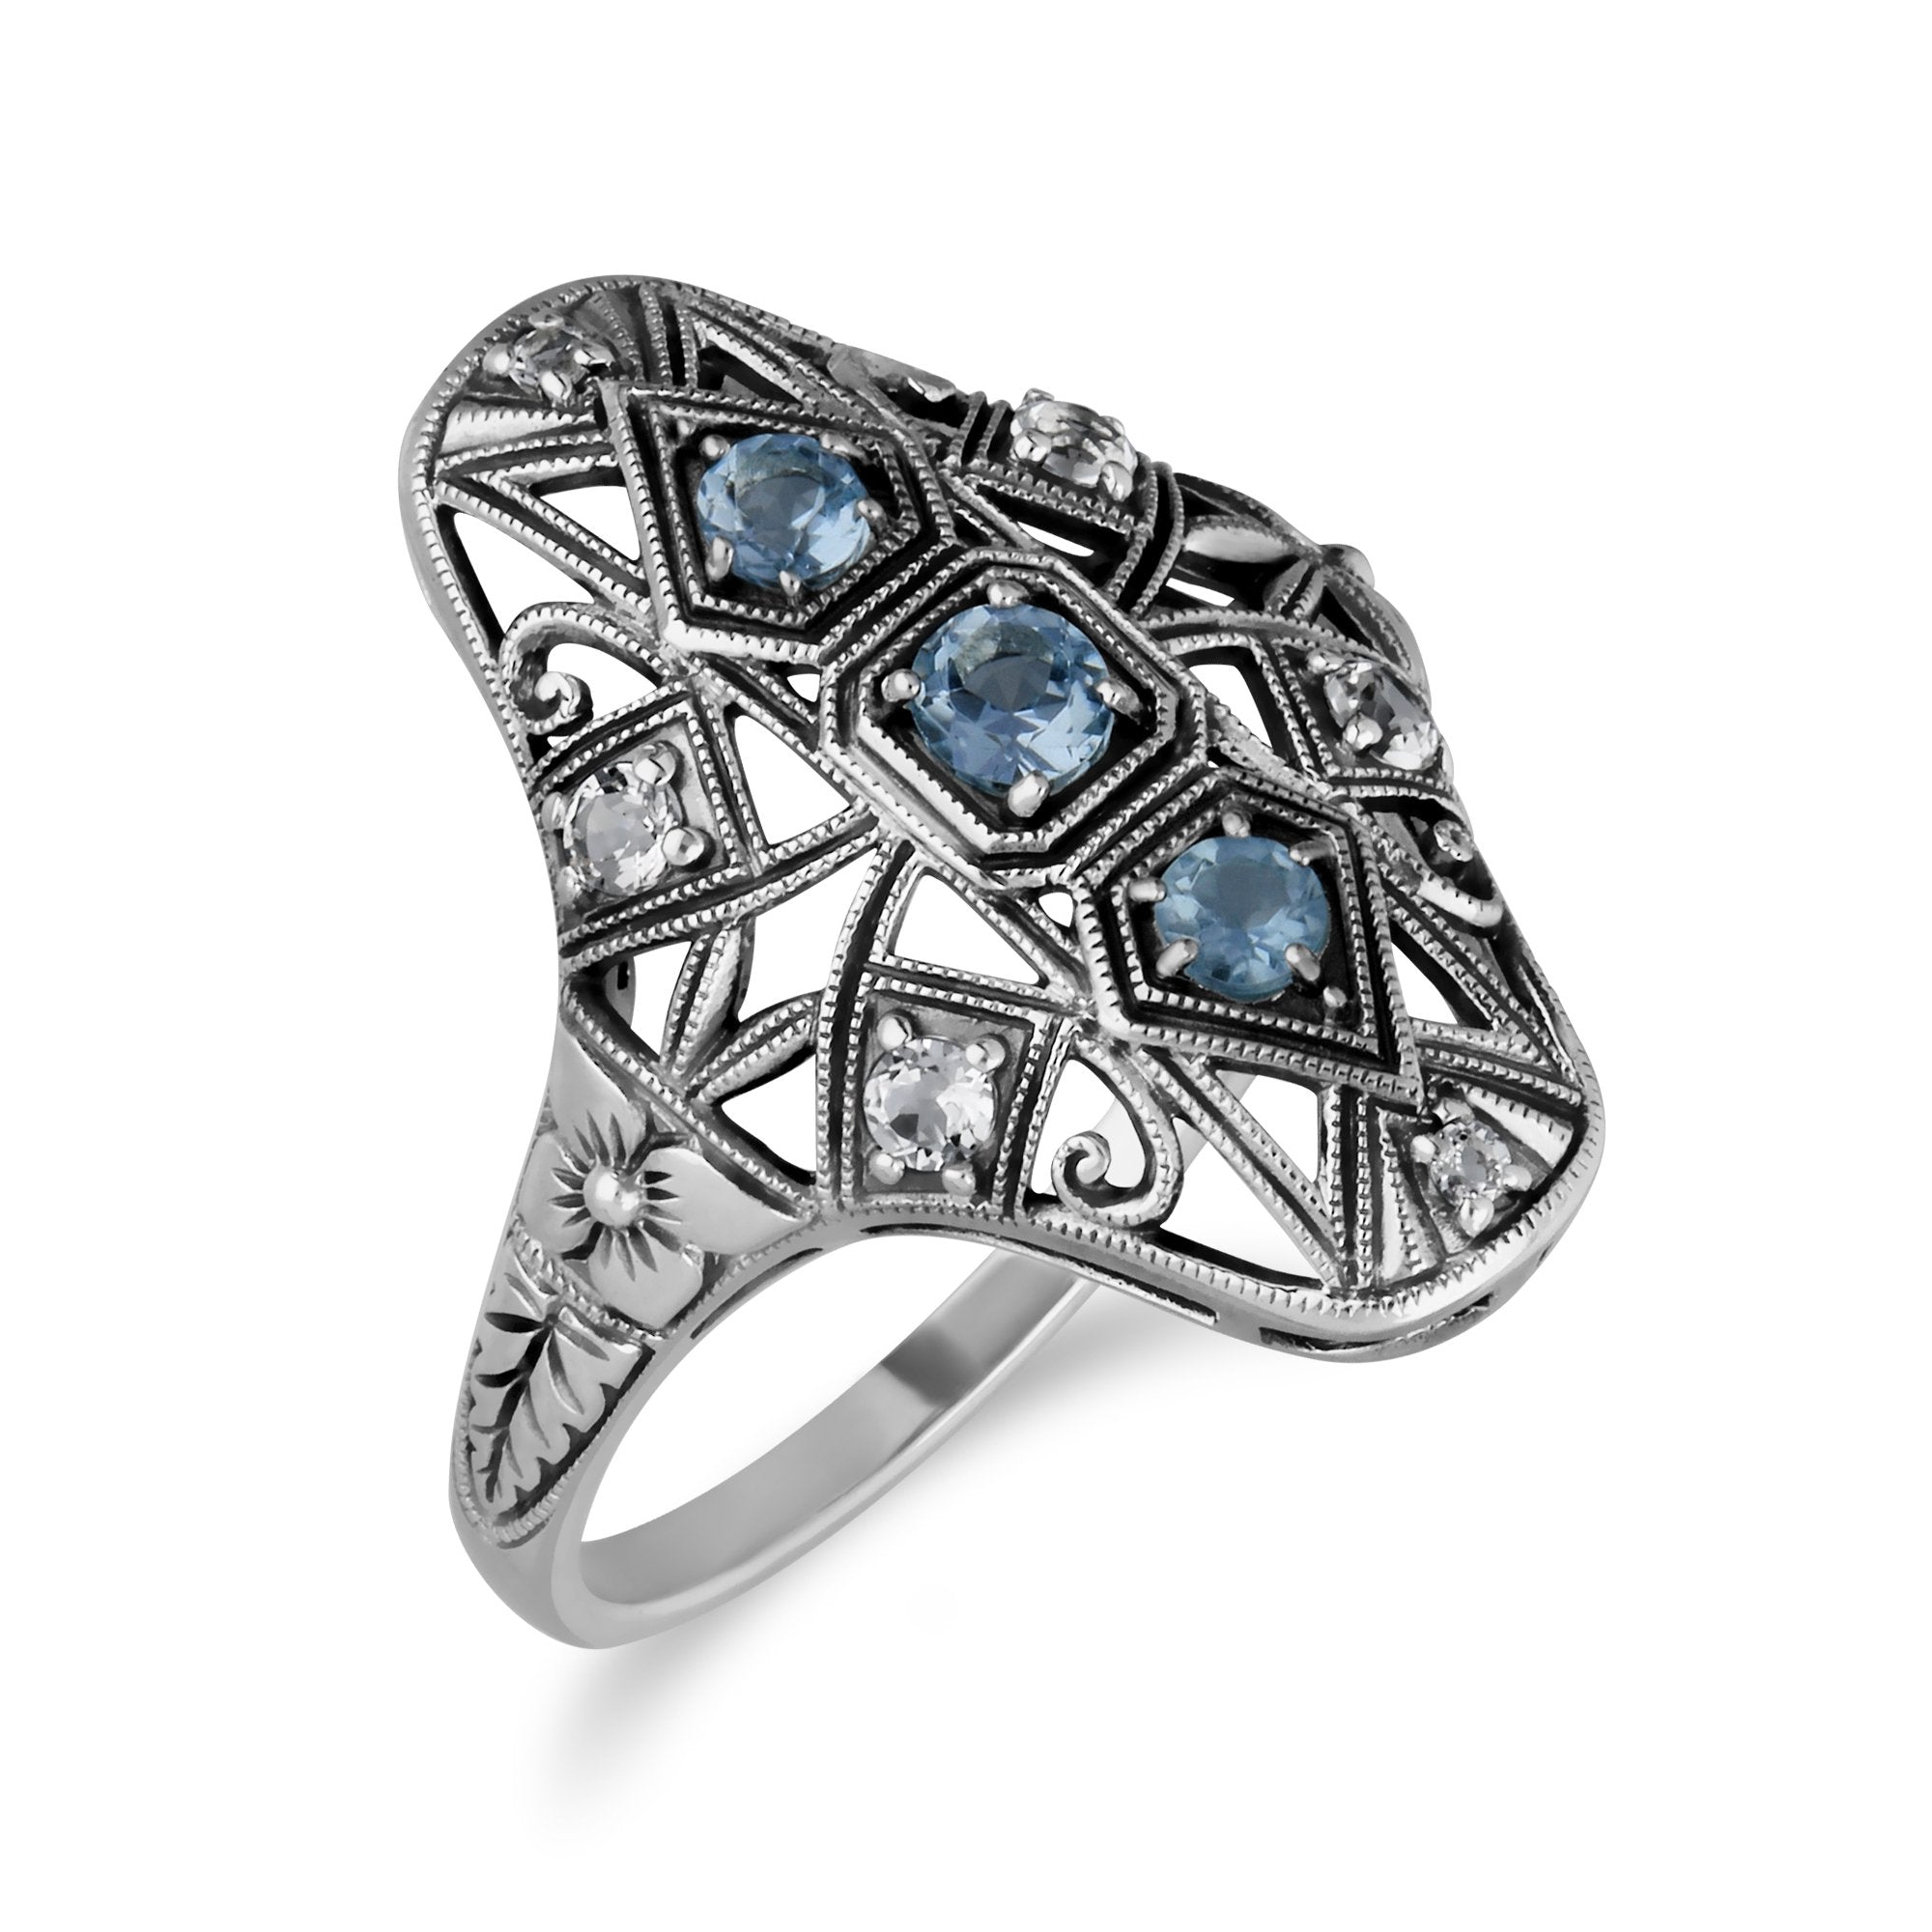 Art Nouveau Style Round Blue & White Topaz Statement Ring in 925 Sterling Silver